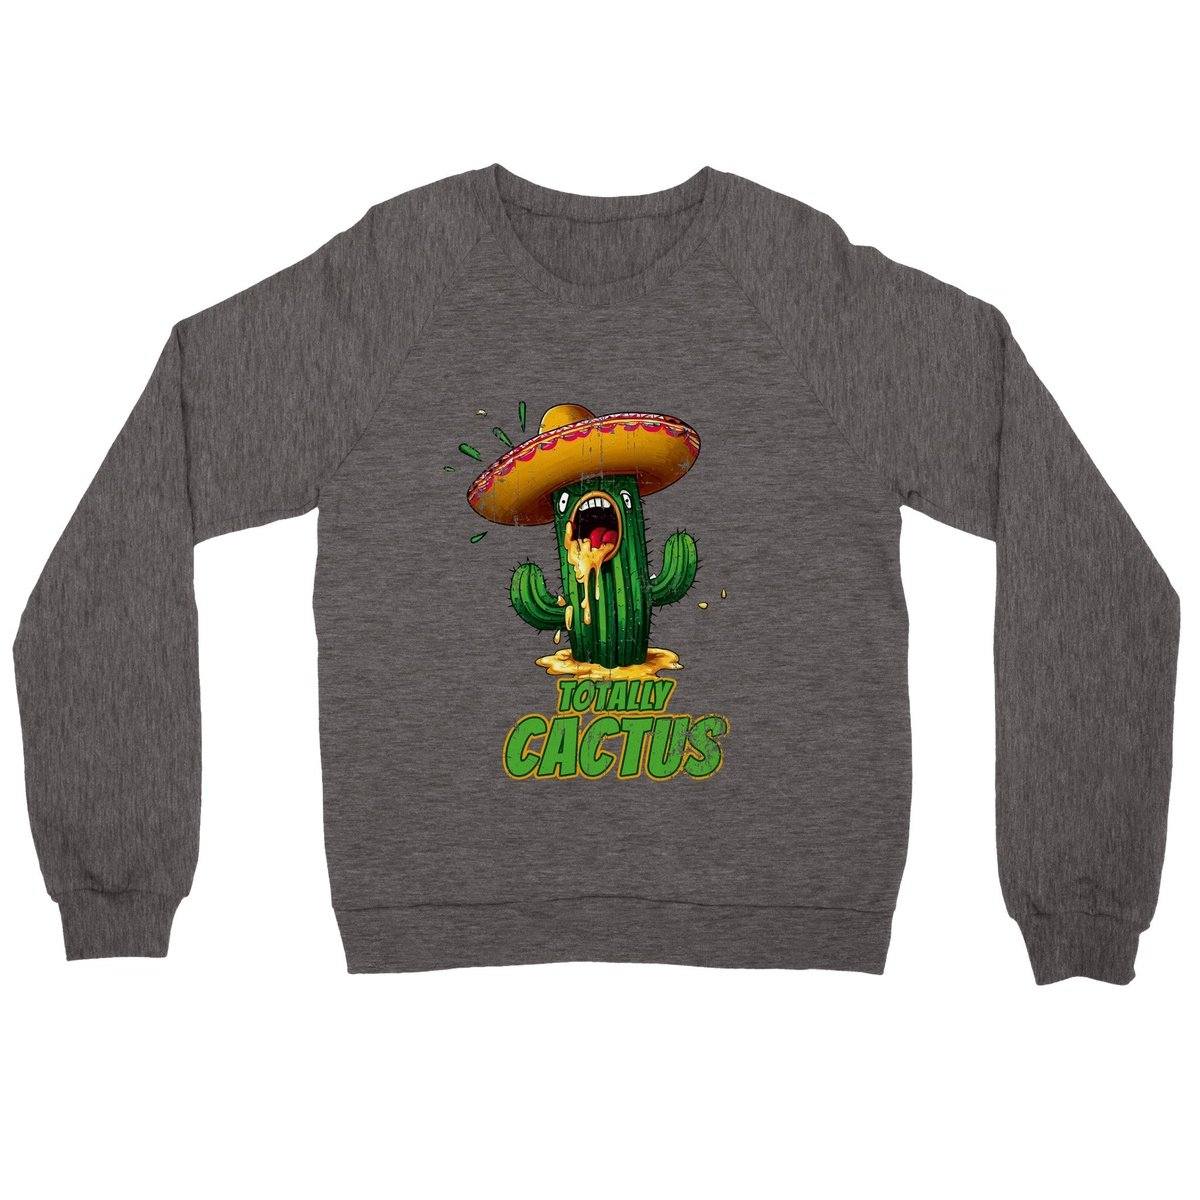 Totally Cactus Jumper Australia Online Color Charcoal Heather / S